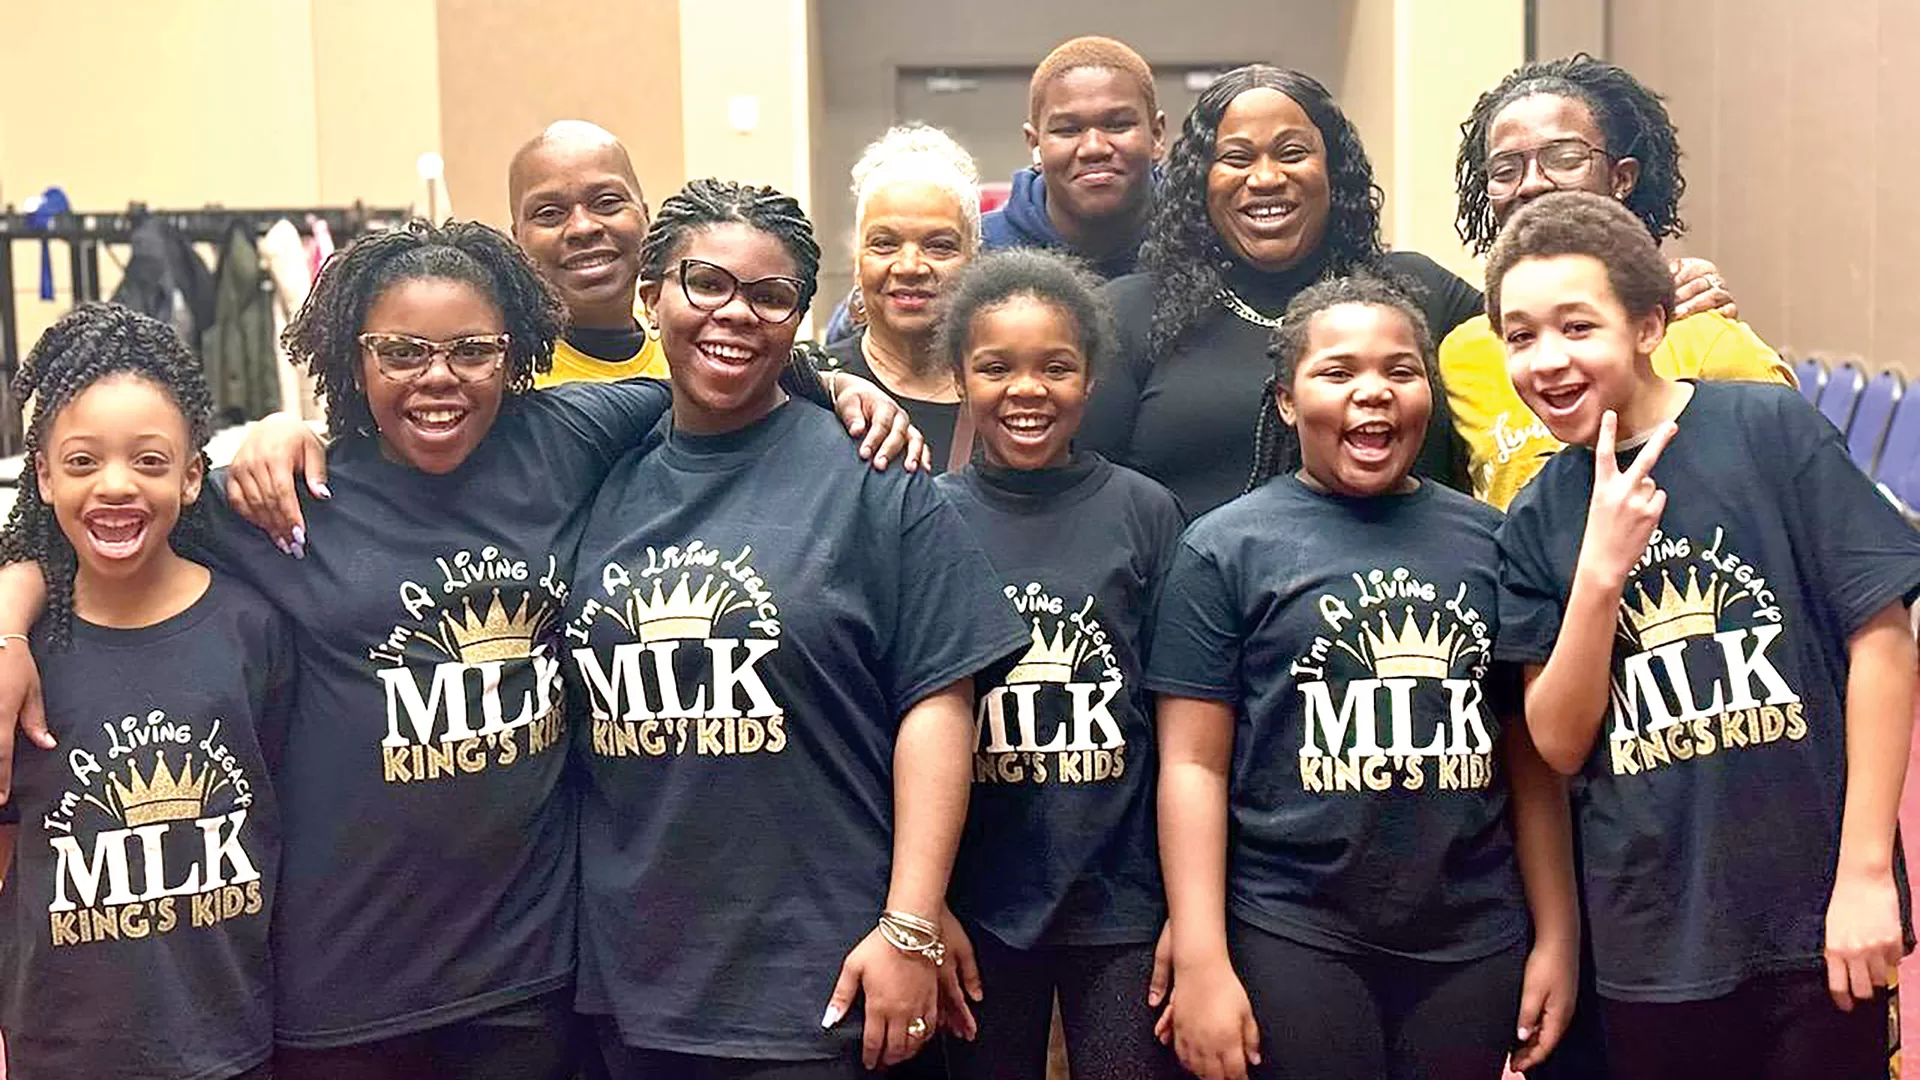 The MLK King’s Kids dance troupe performed at MLK Day this year.